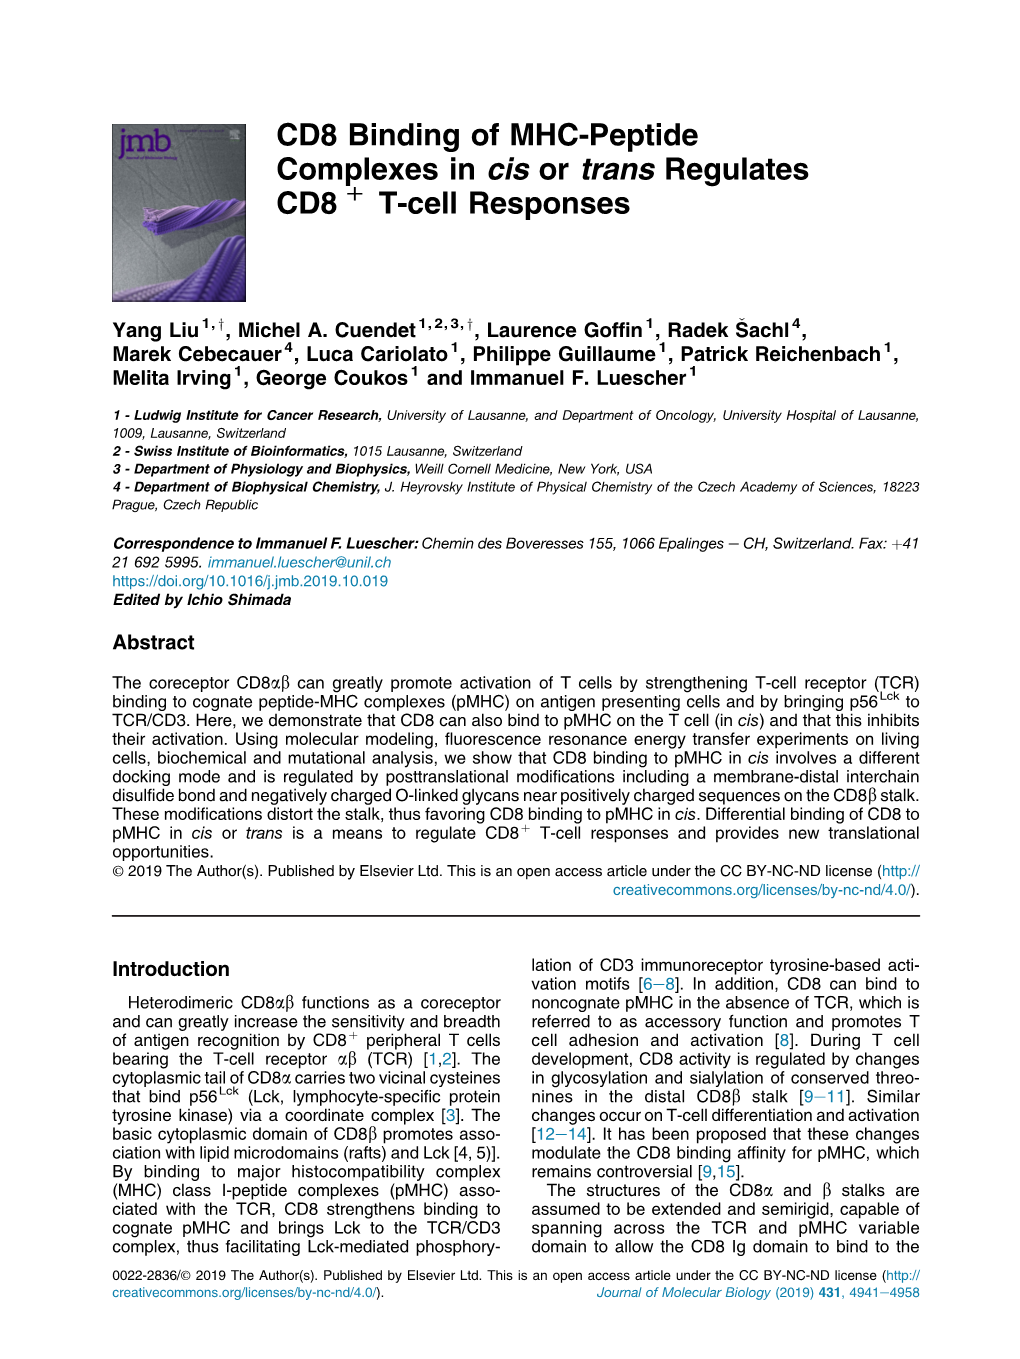 CD8 Binding of MHC-Peptide Complexes in Cis Or Trans Regulates CD8 D T-Cell Responses